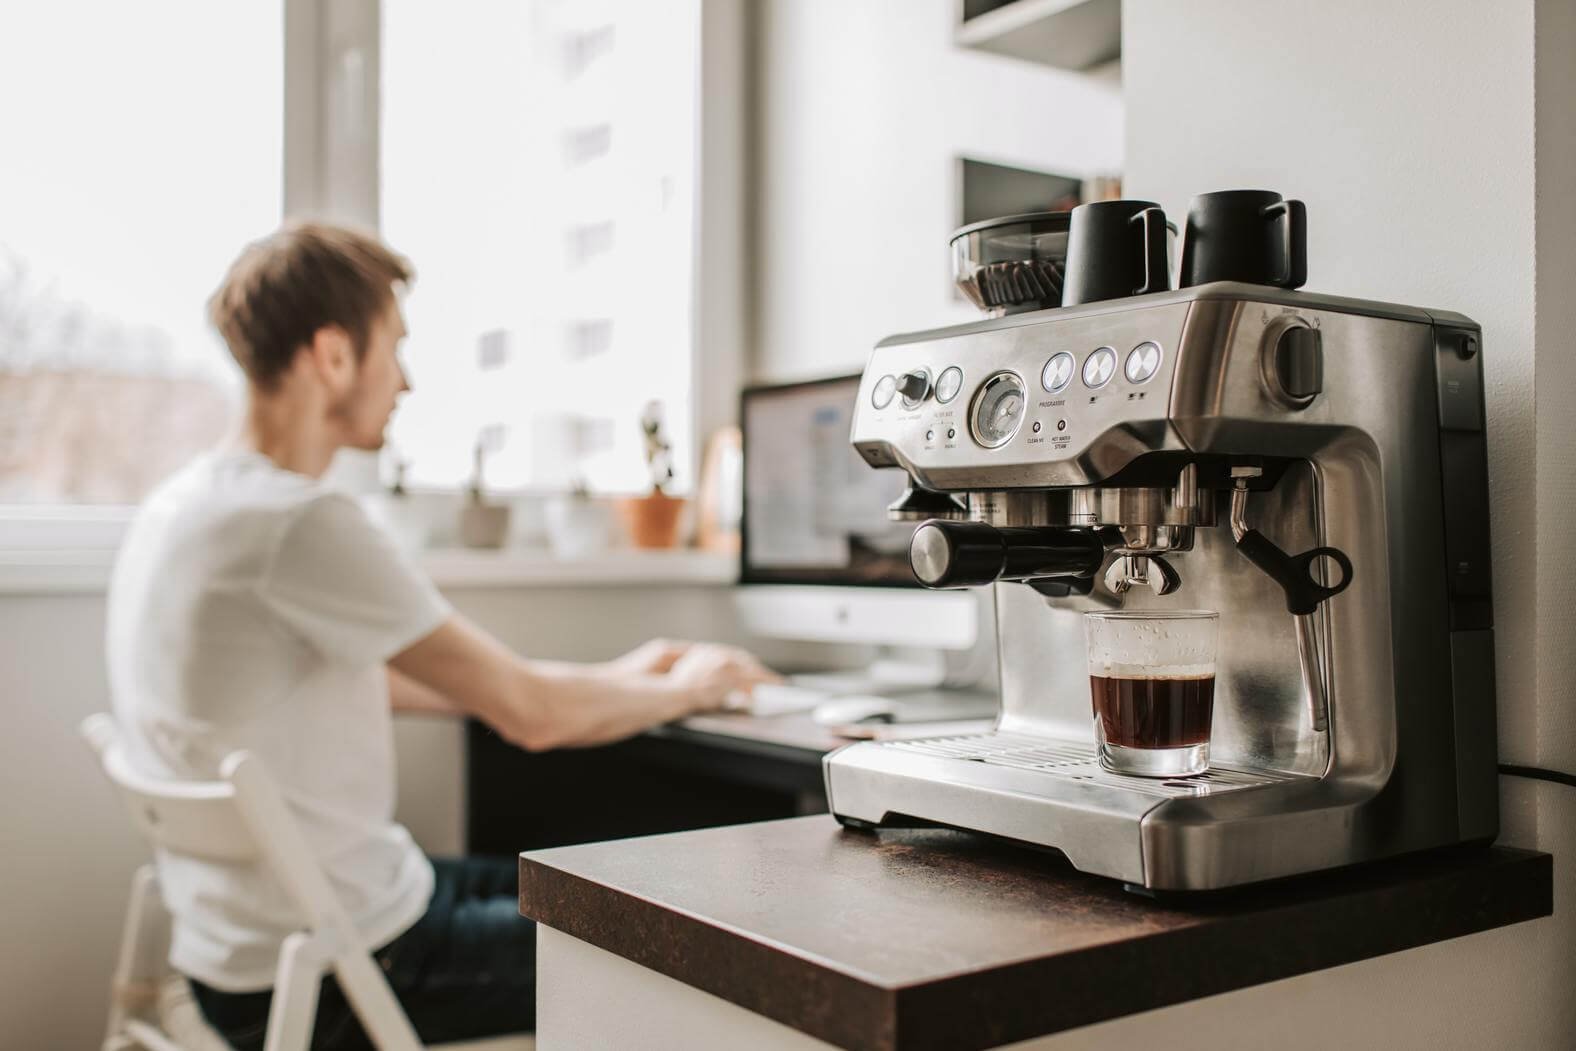 How to Clean a Coffee Machine and Grinder